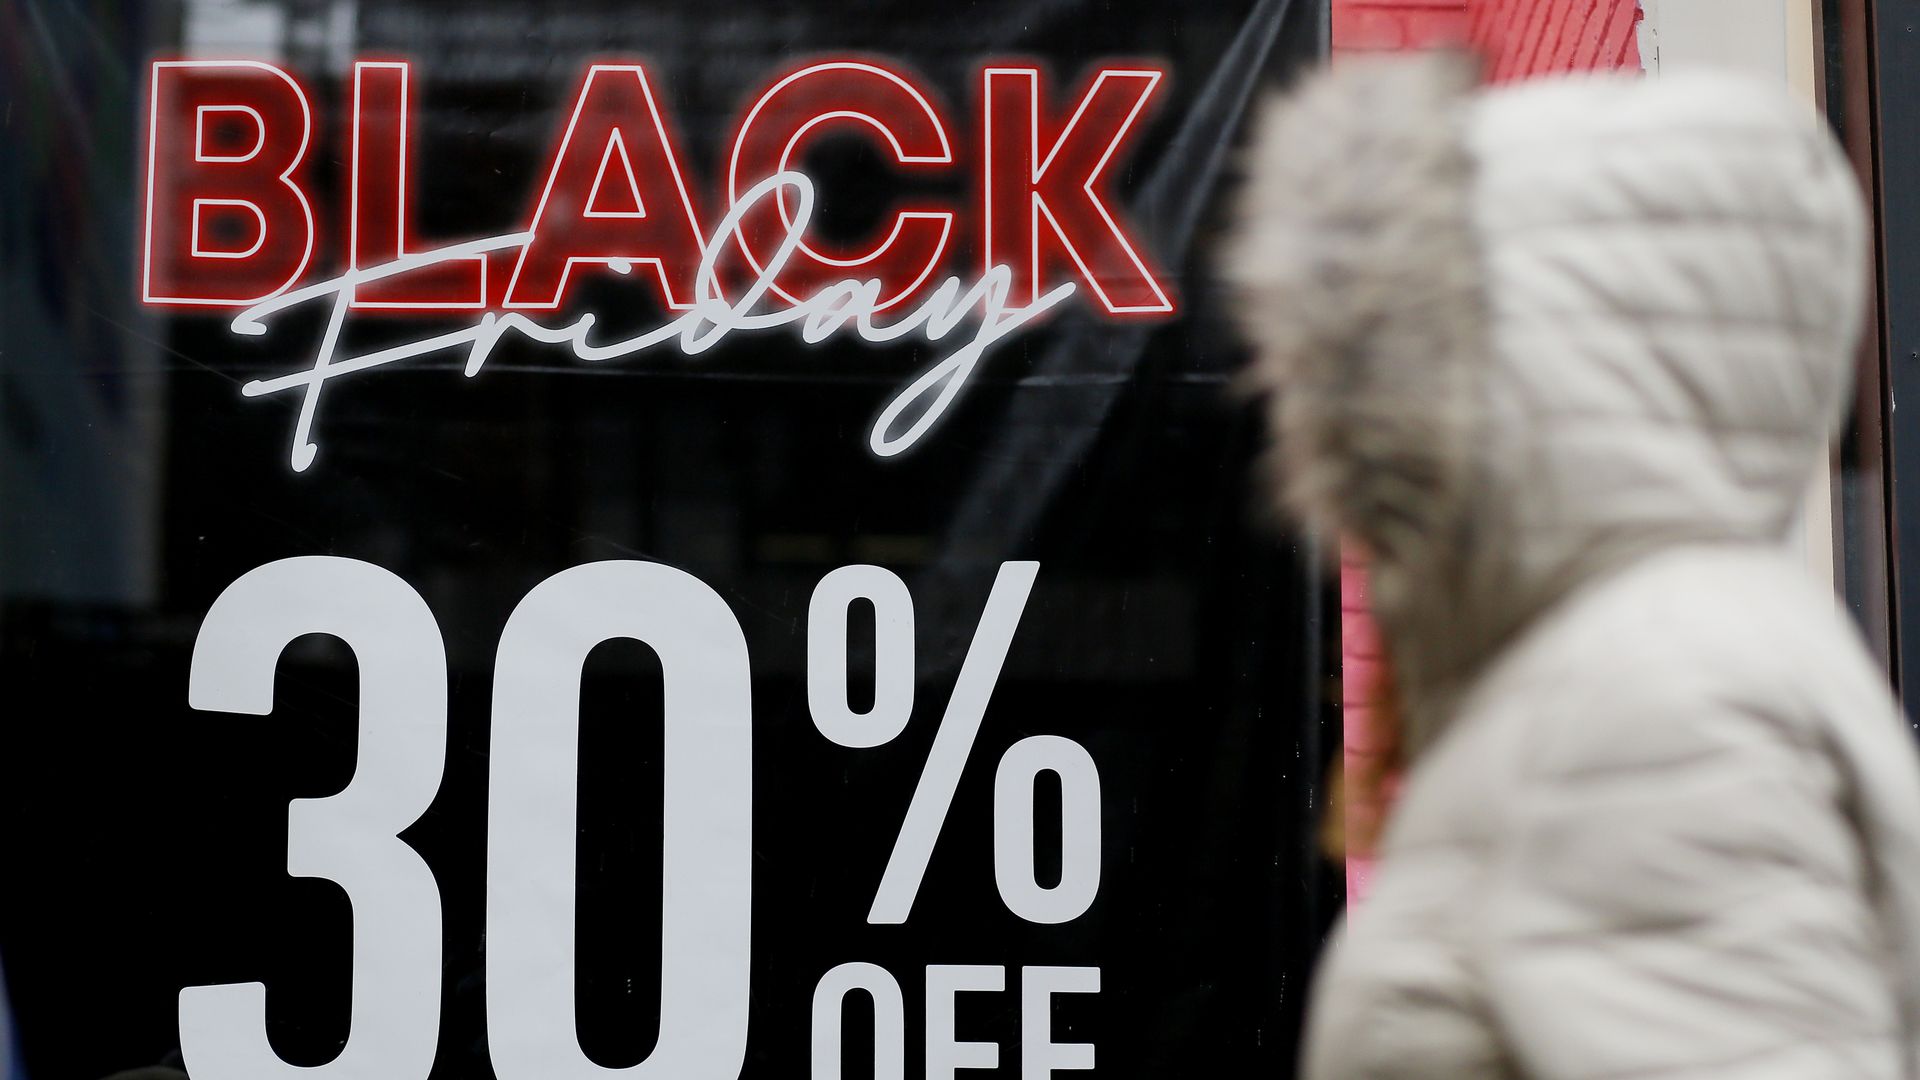 Shopper walks by a sign that says Black Friday 30%